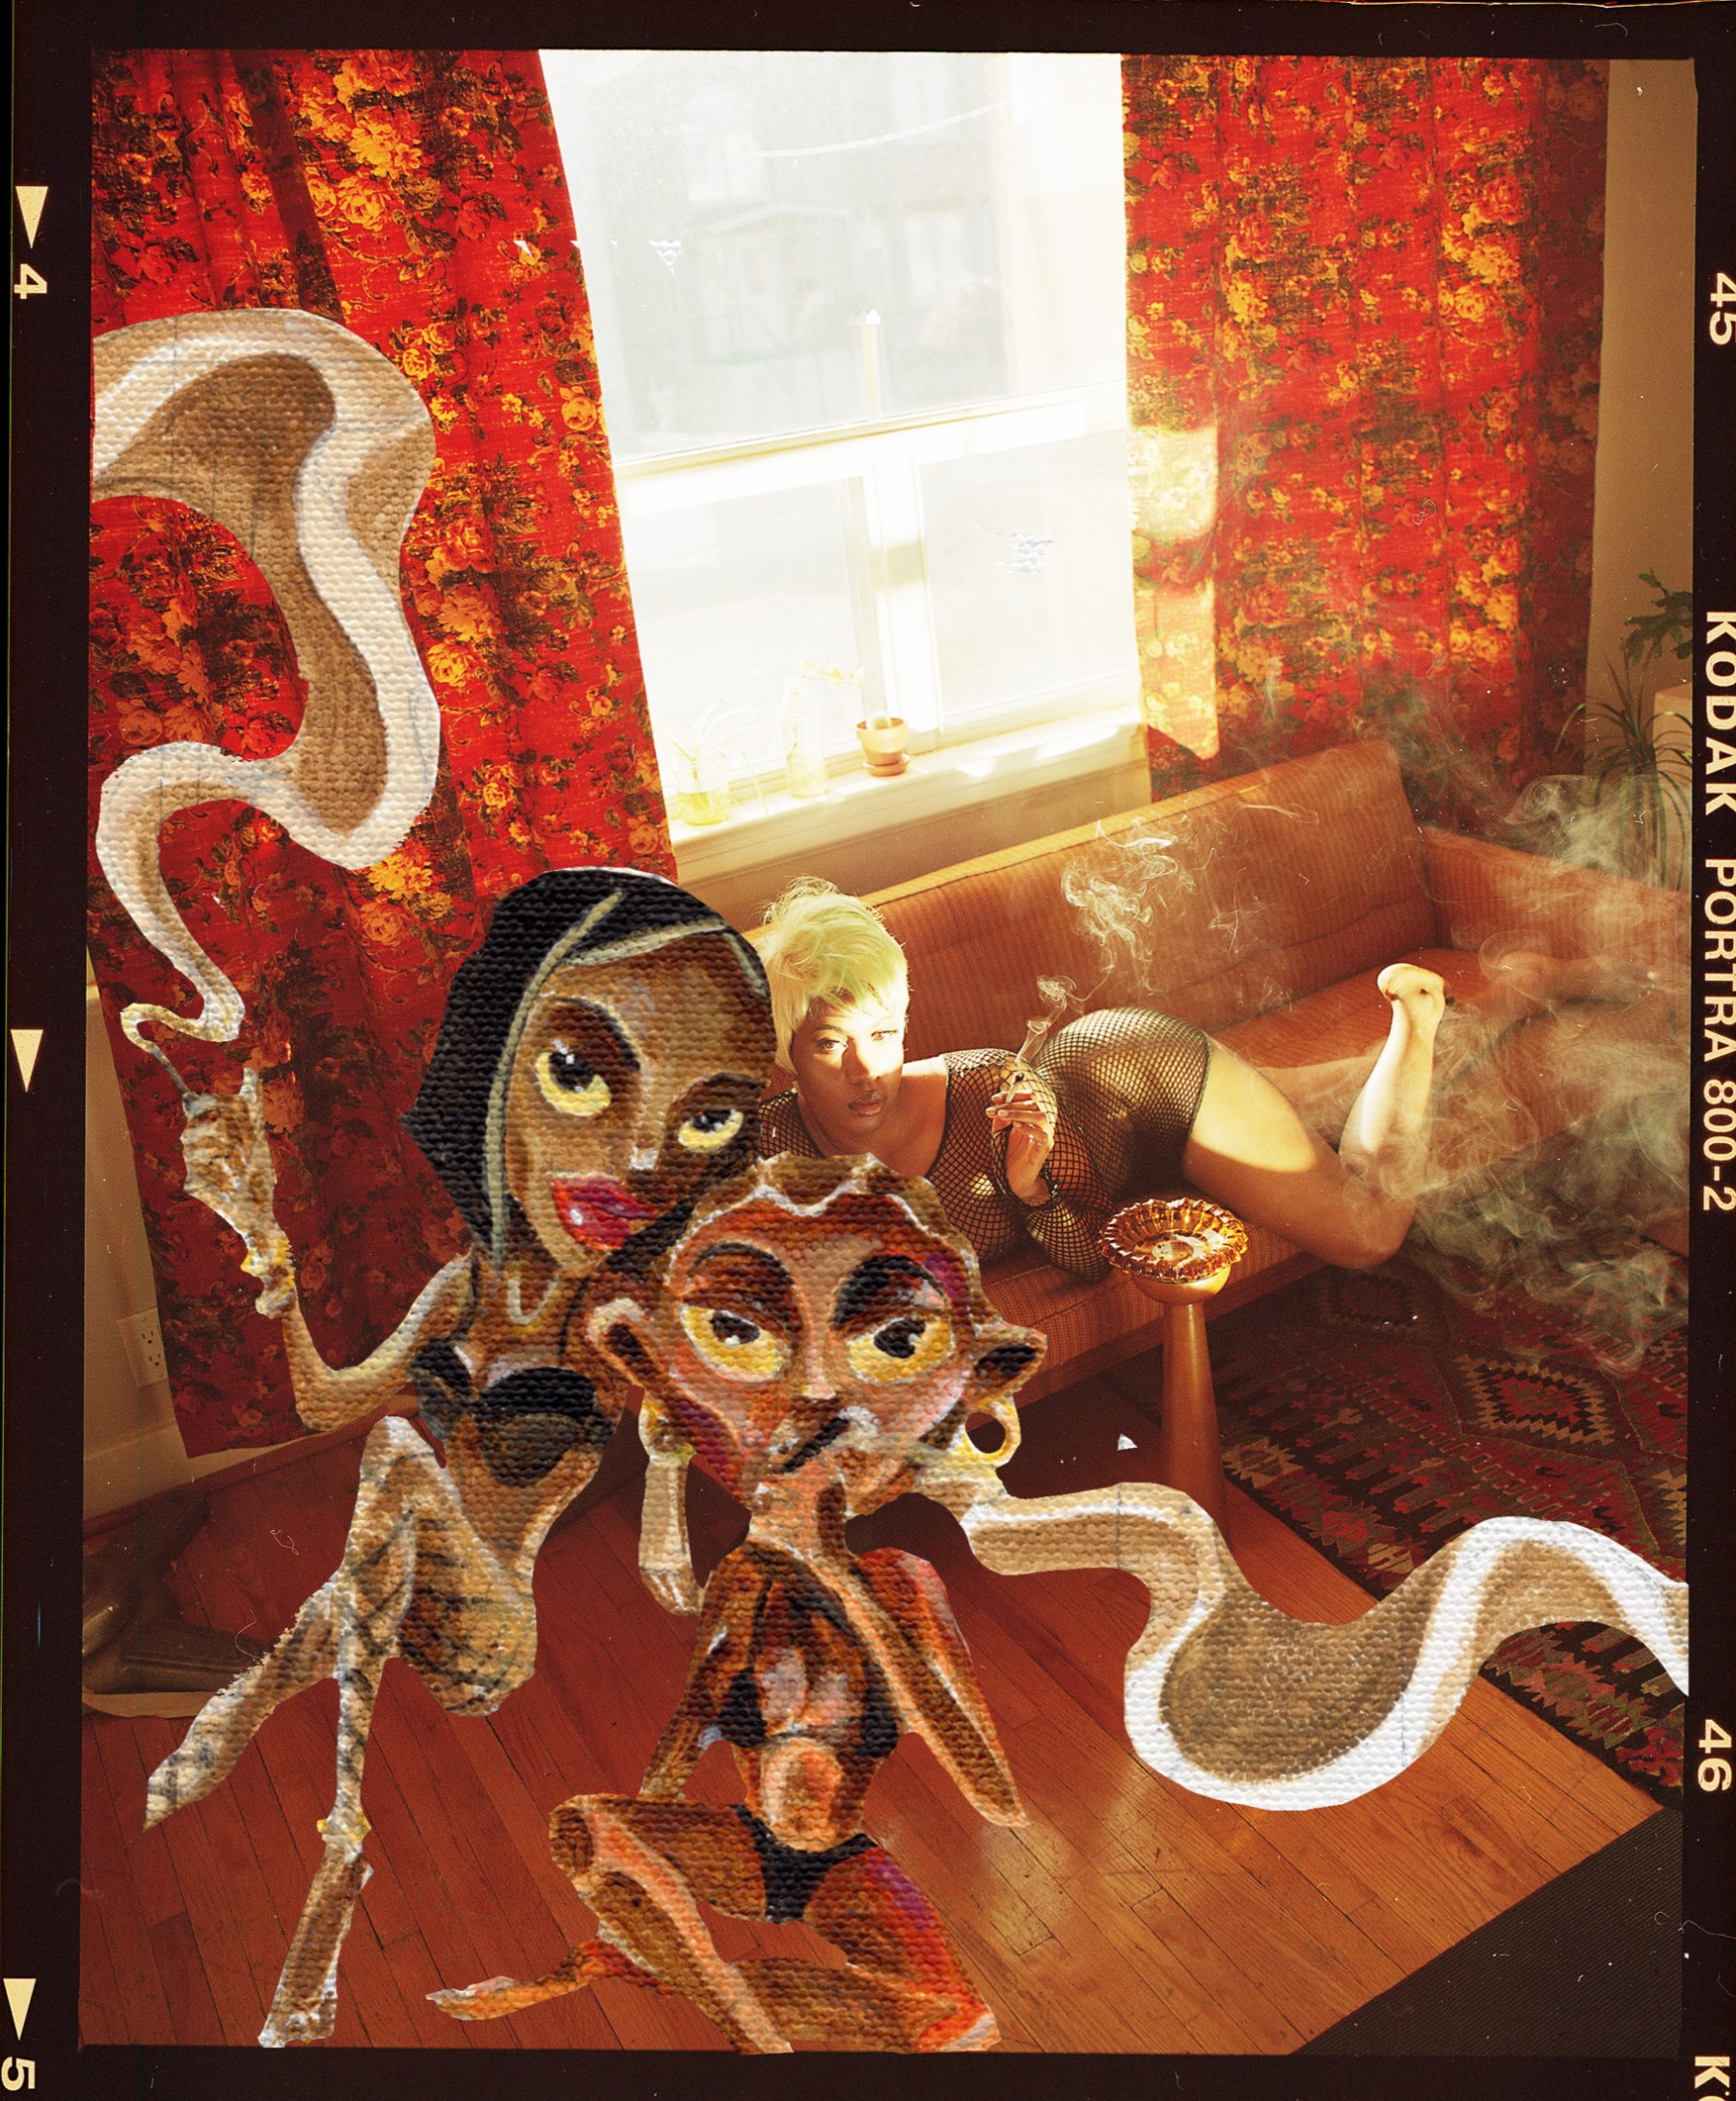 A Black woman (artist Kadine Lindsay) lays on a couch smoking a joint as bright, golden afternoon pours in through the window behind her. Sitting on the ground beside her are two painted women, also smoking.